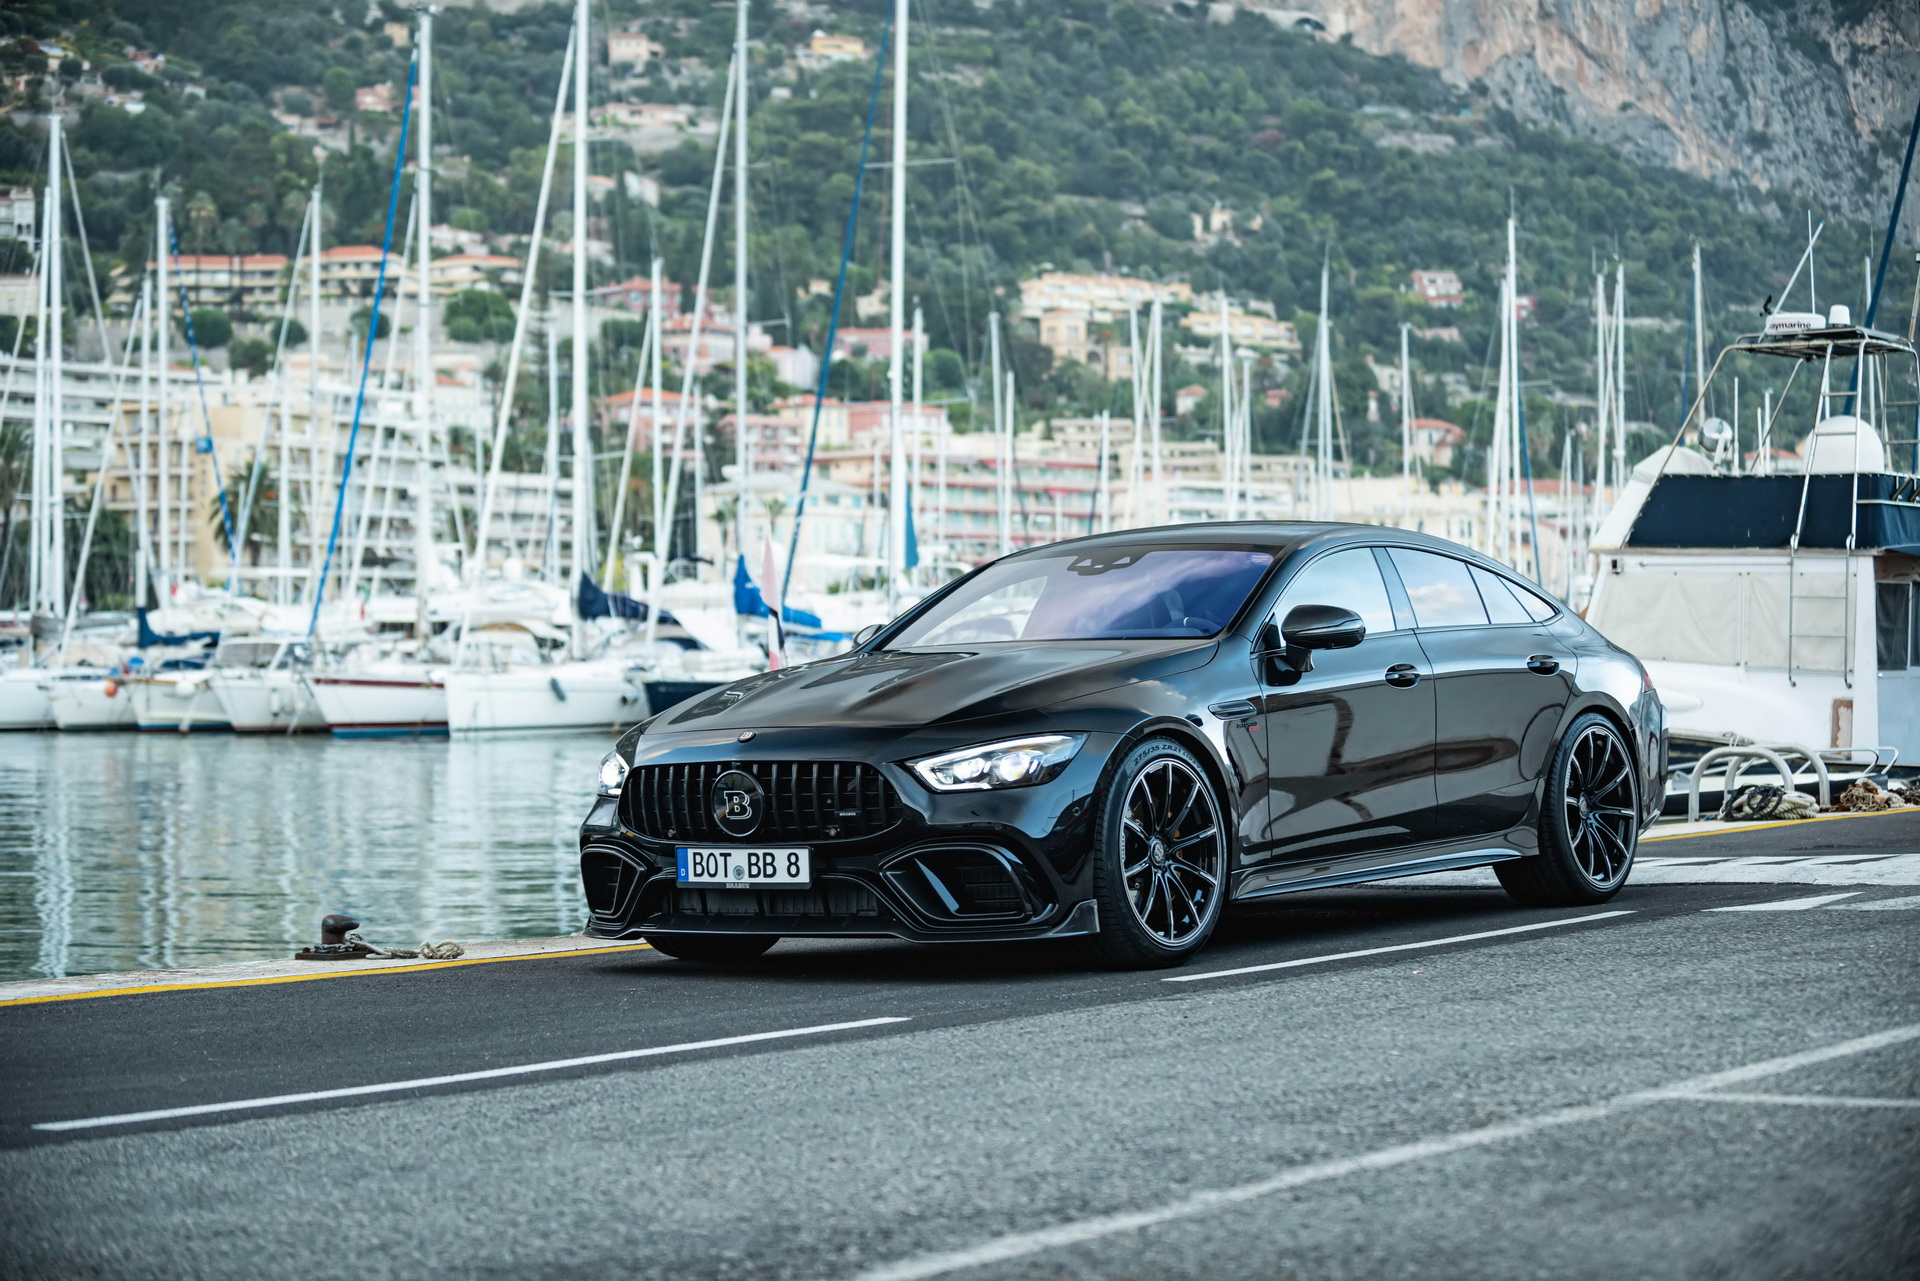 Brabus 800 Mercedes Amg Gt 63 S 4 Door Coupe Is The Ultimate Family Supercar